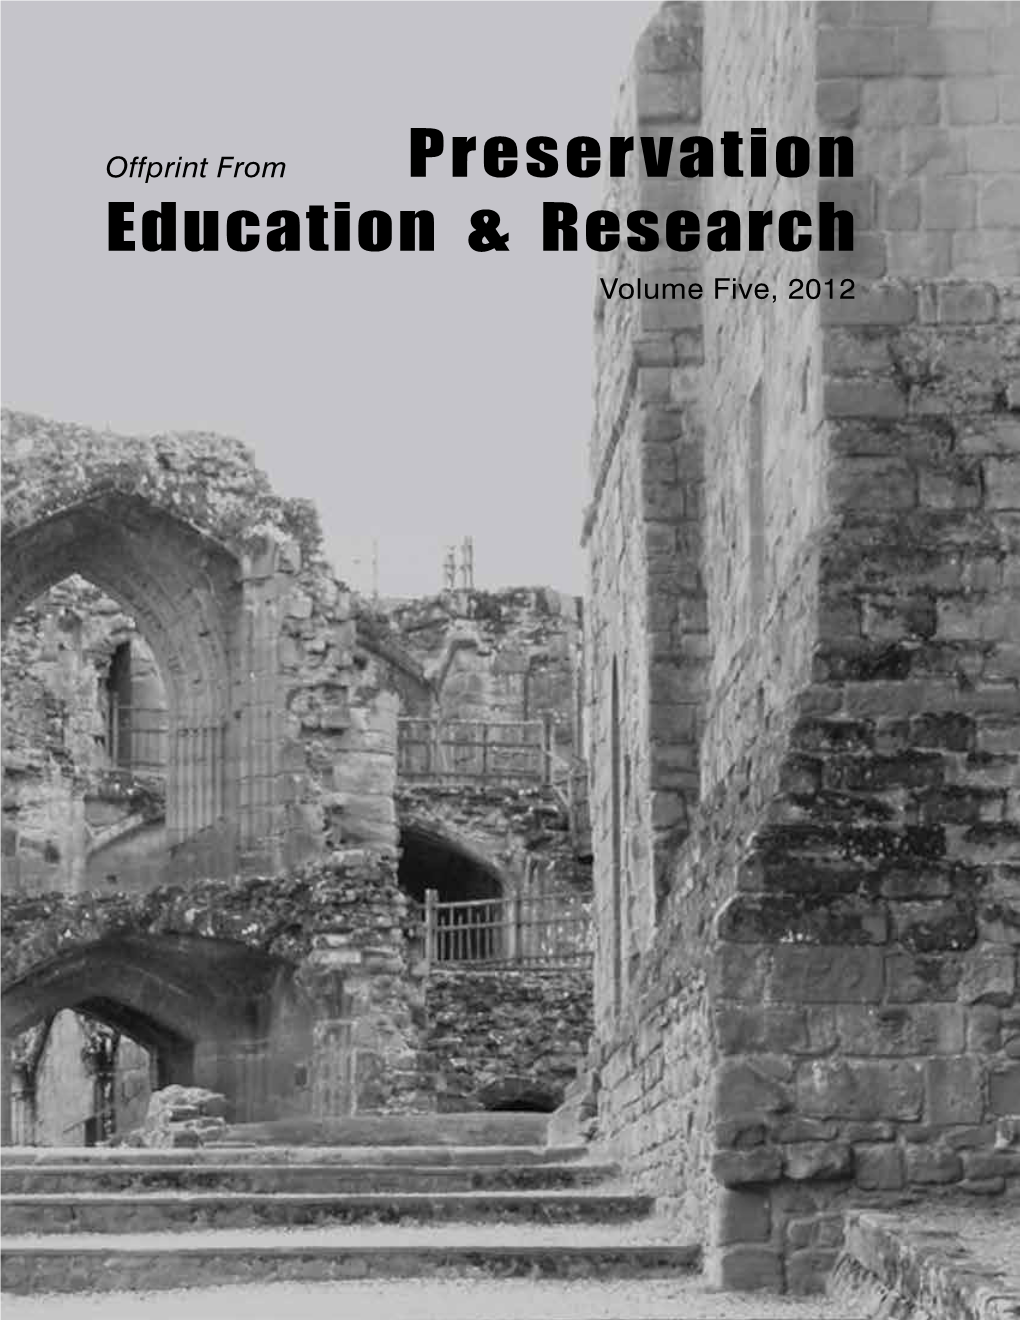 Preservation Education & Research